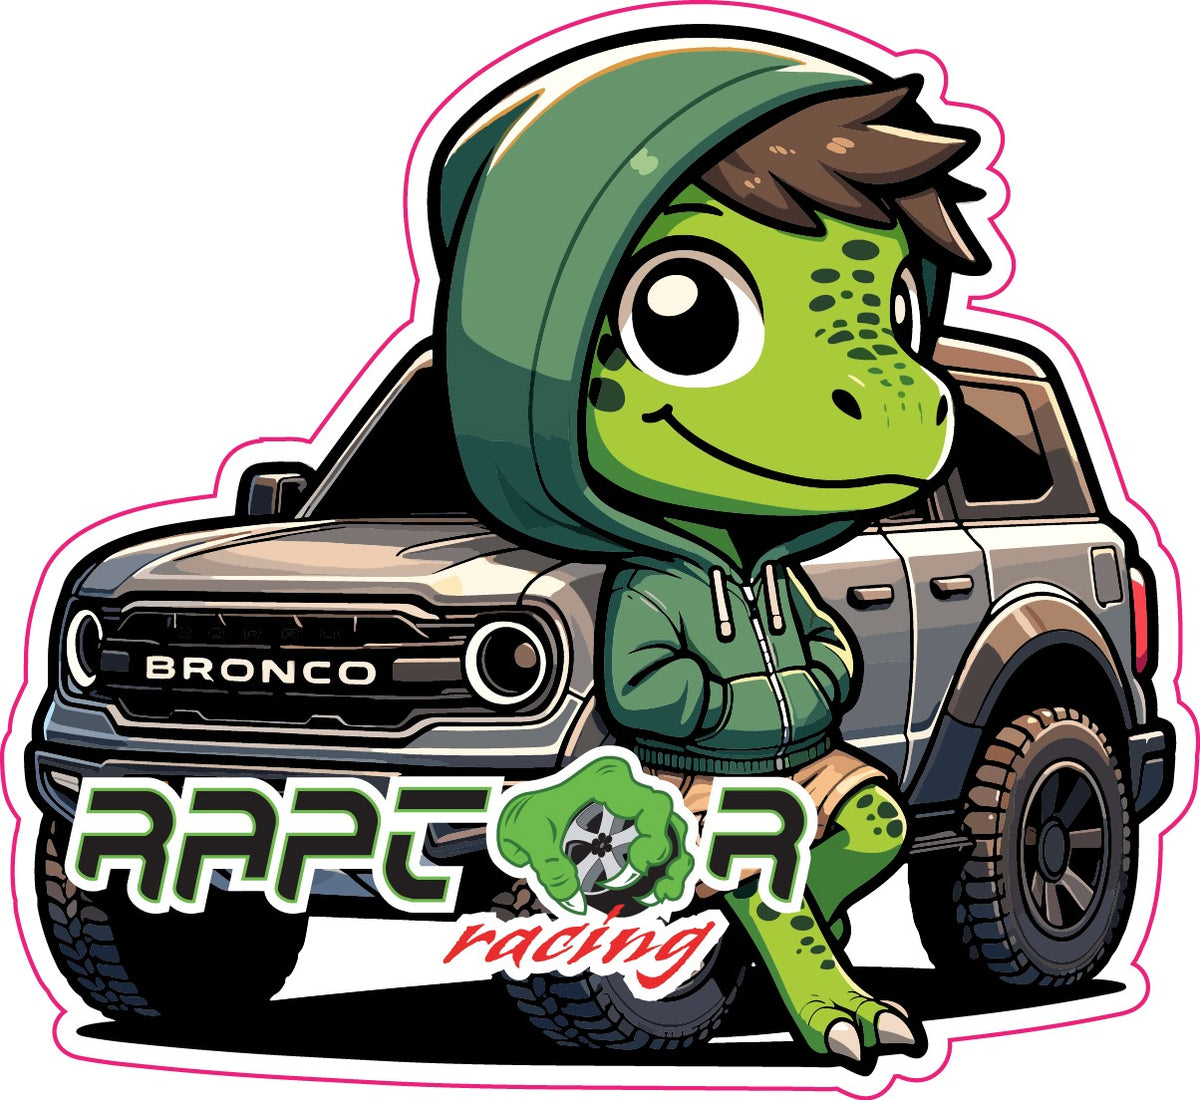 Raptor Racing - Limited Edition Stickers